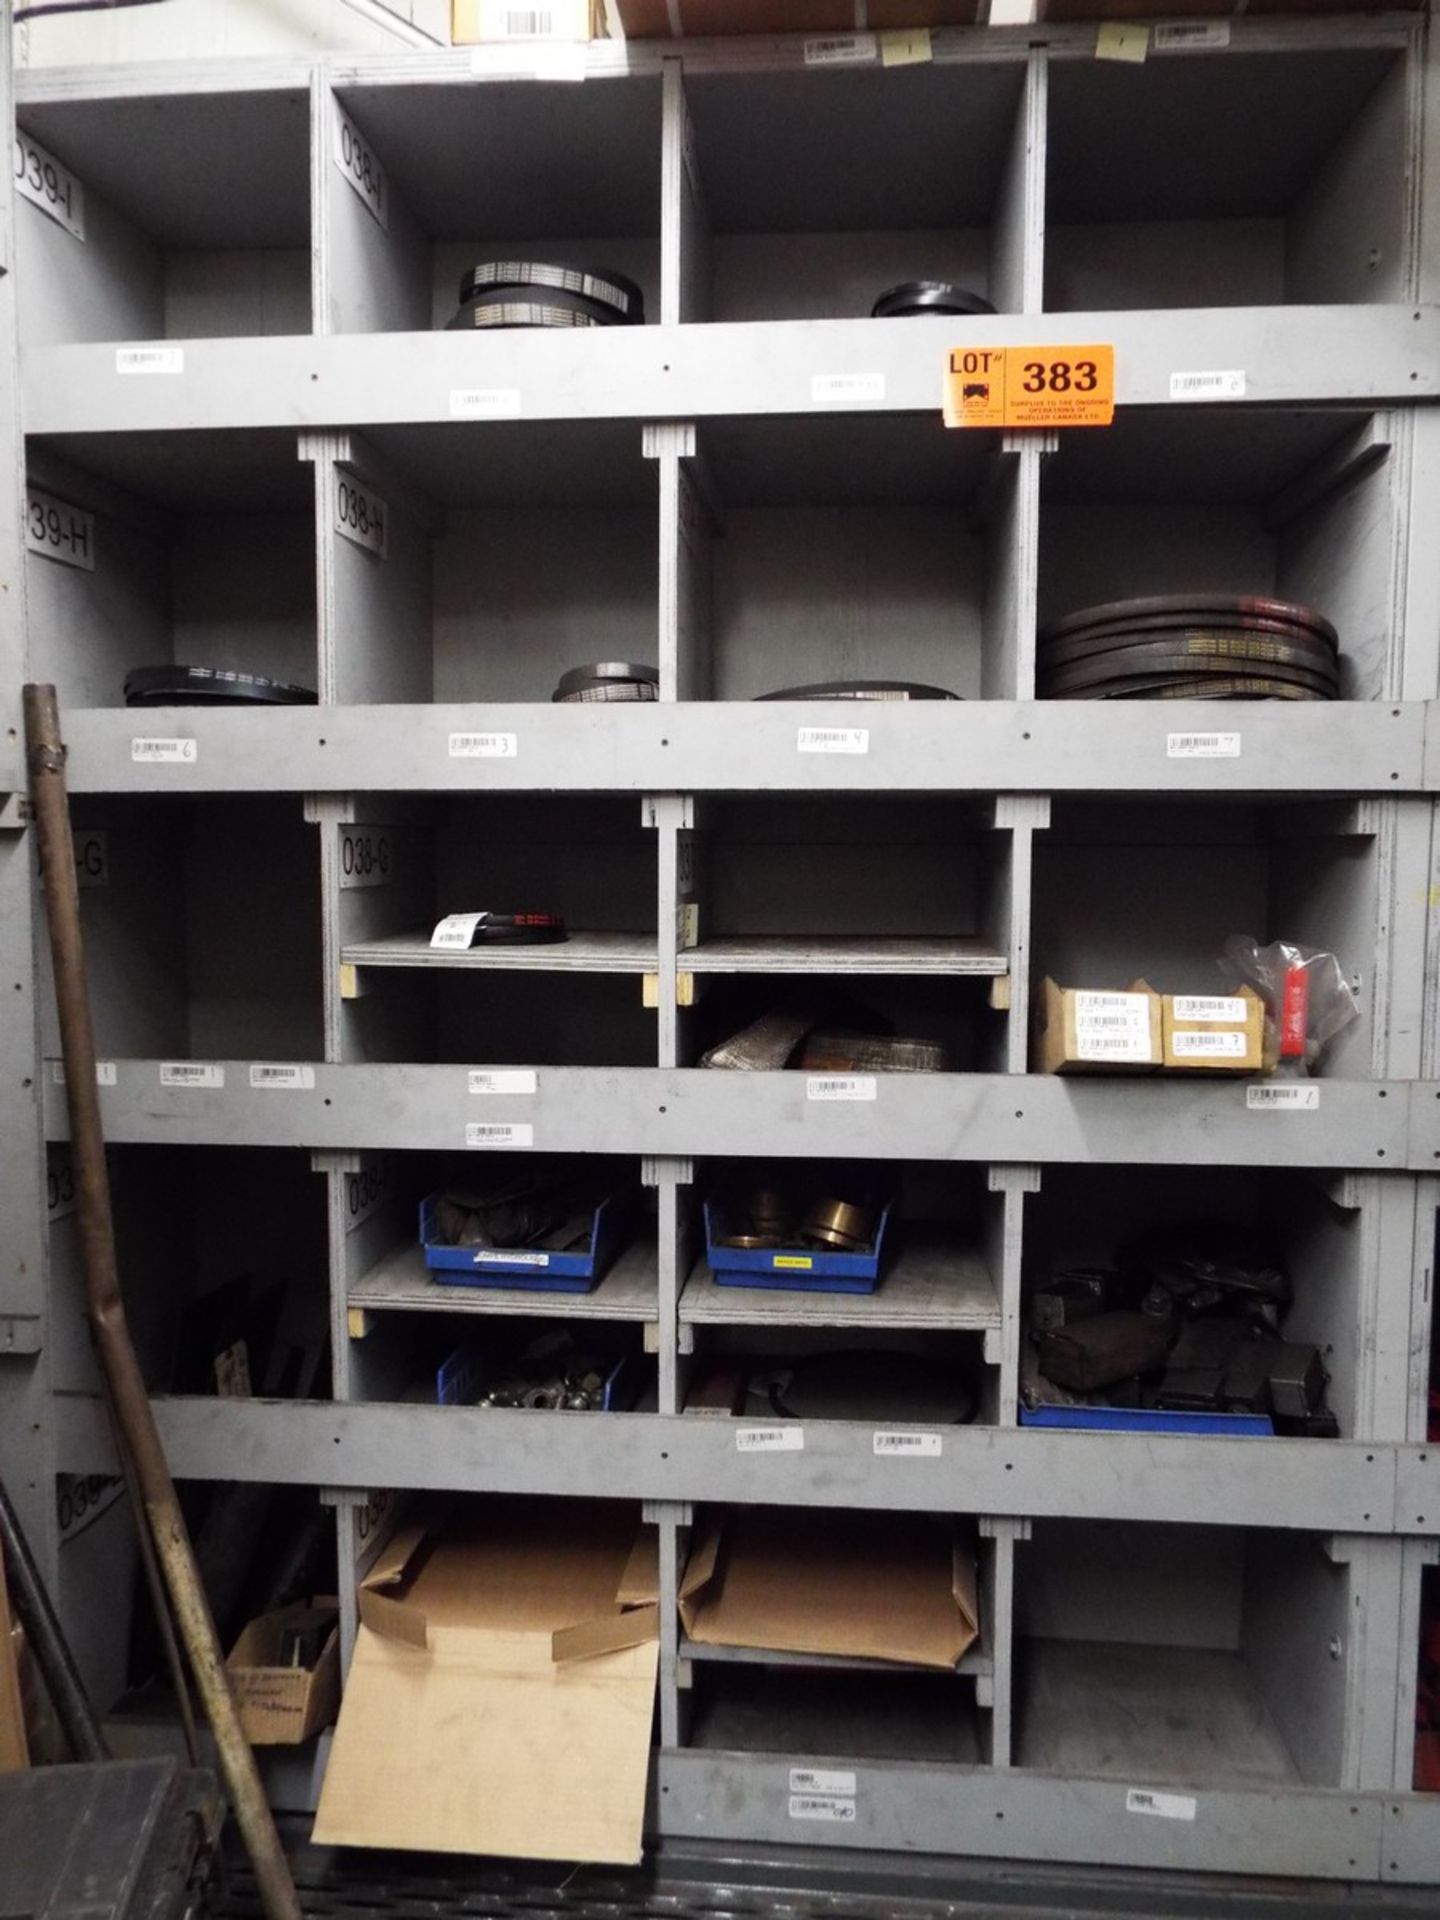 LOT/ CONTENTS OF SHELF - DRIVE BELTS AND SPARE PARTS